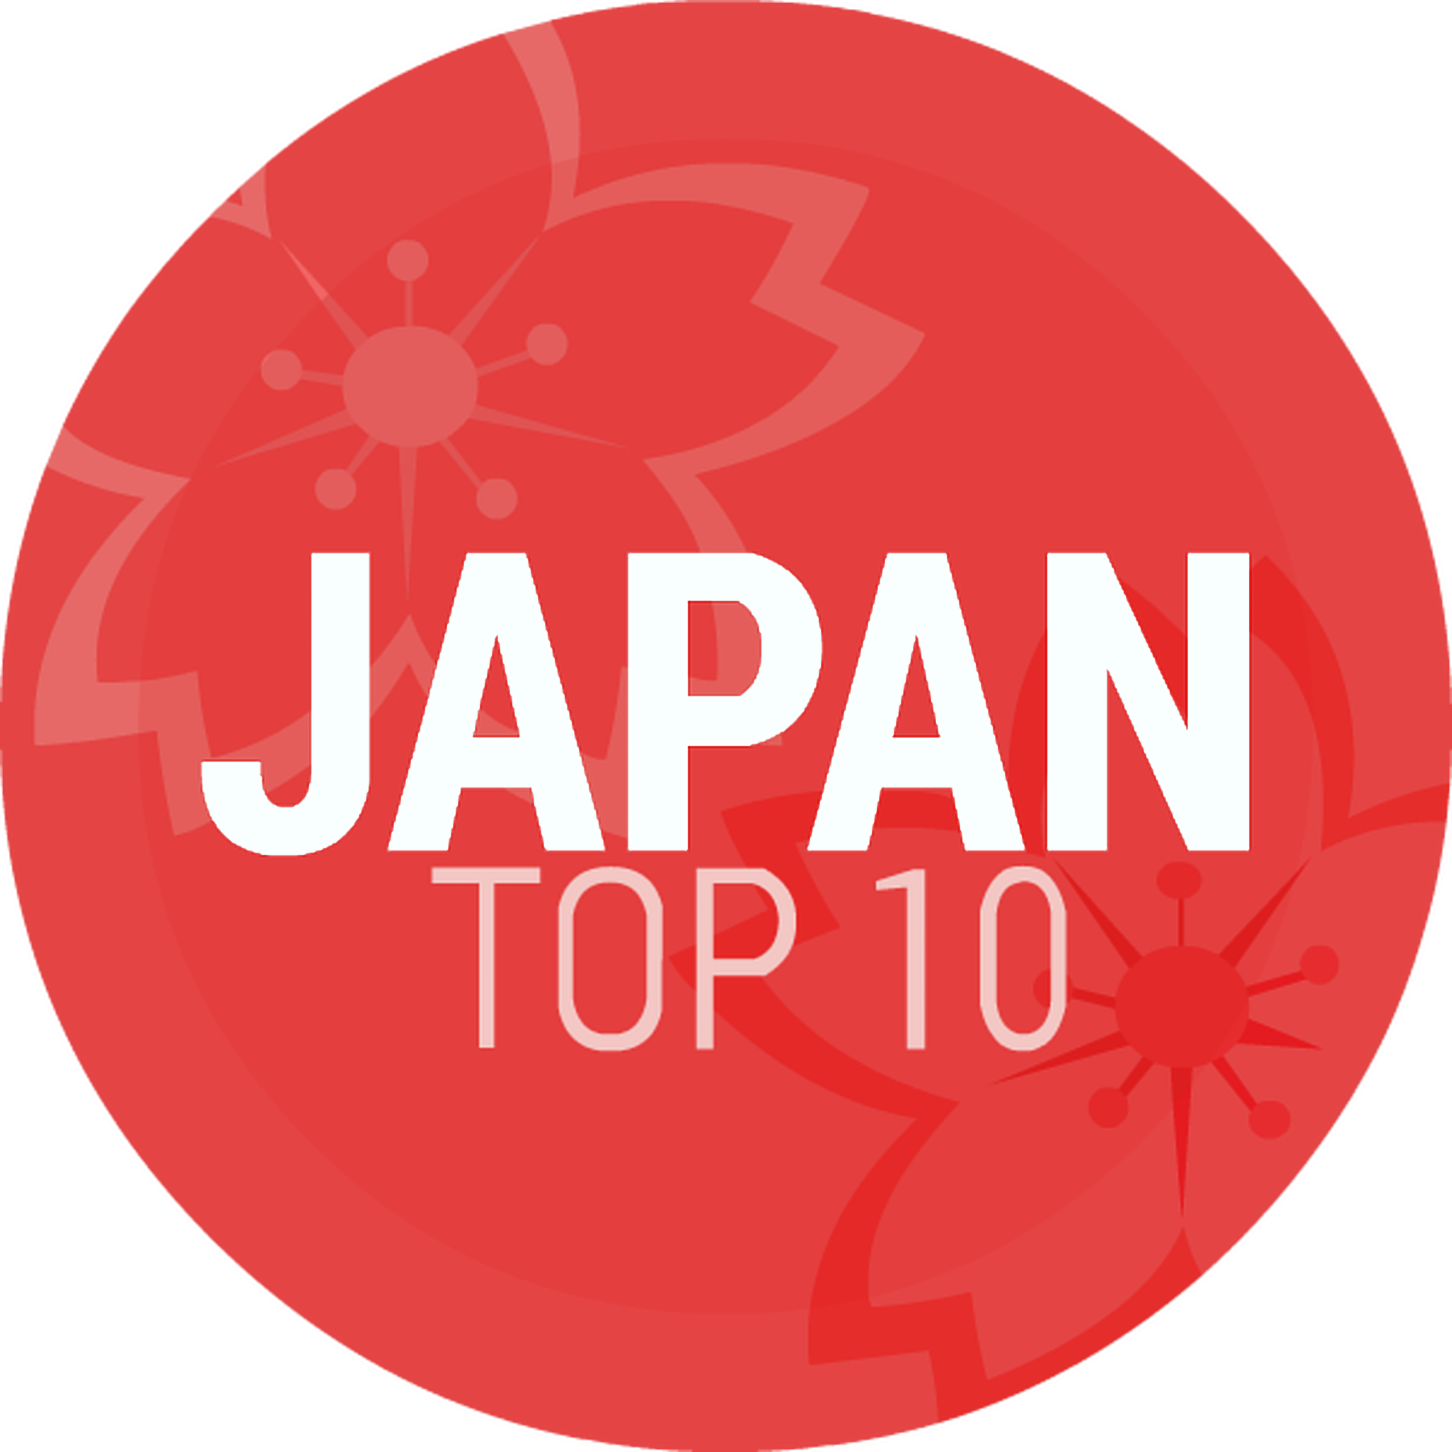 Episode 195: Japan Top 10 Early August 2017 Countdown